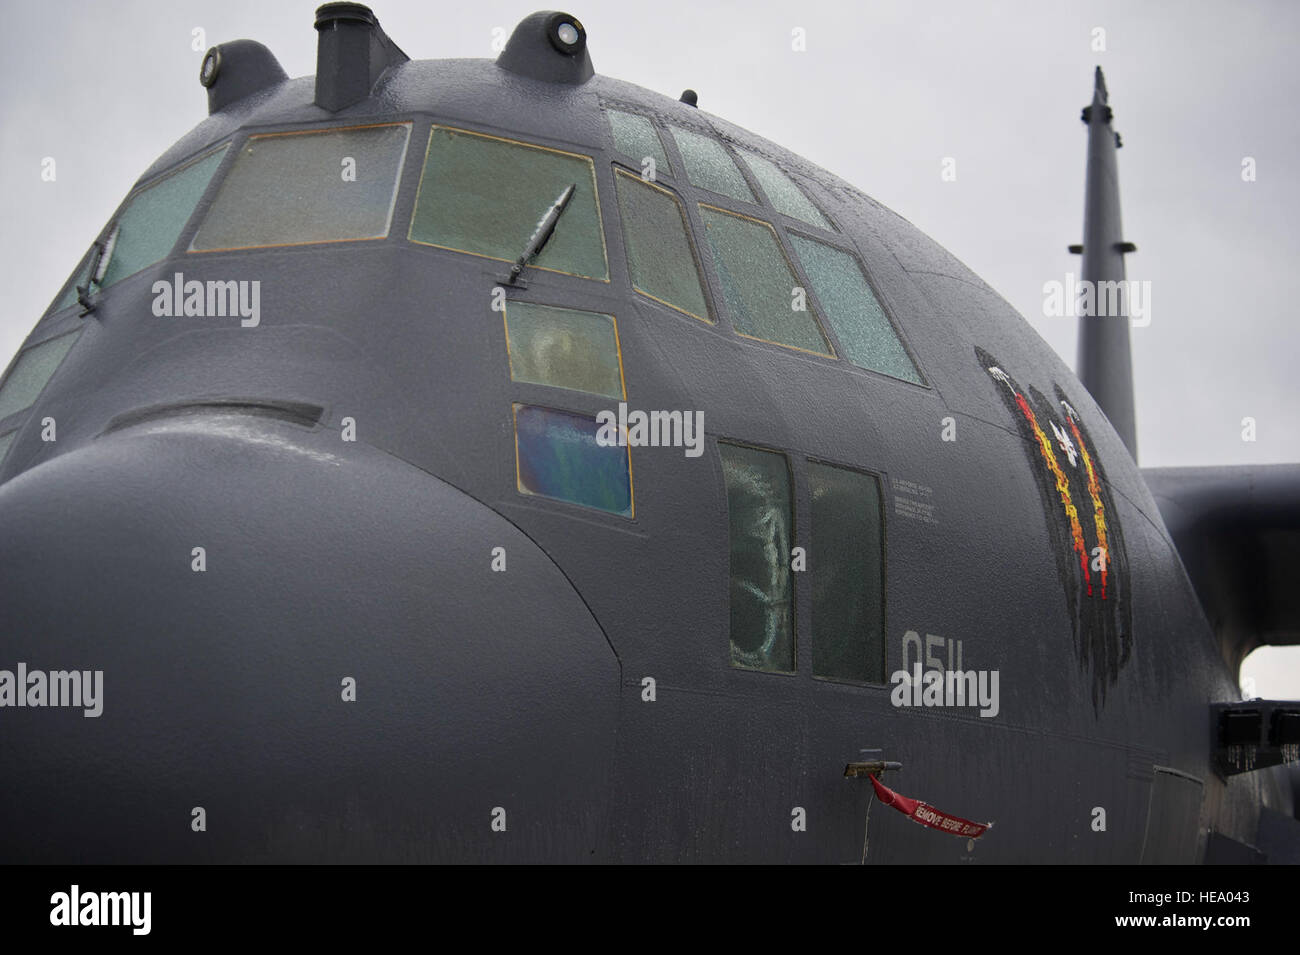 Ice coats the nose and windshield of an AC-130U Spooky gunship at Hurlburt Field, Fla., Jan. 29, 2014. Freezing rain and plunging temperatures left the entire aircraft covered in a thin layer of ice. (U.S. Air Force Photo/ Staff Sgt. John Bainter) Stock Photo